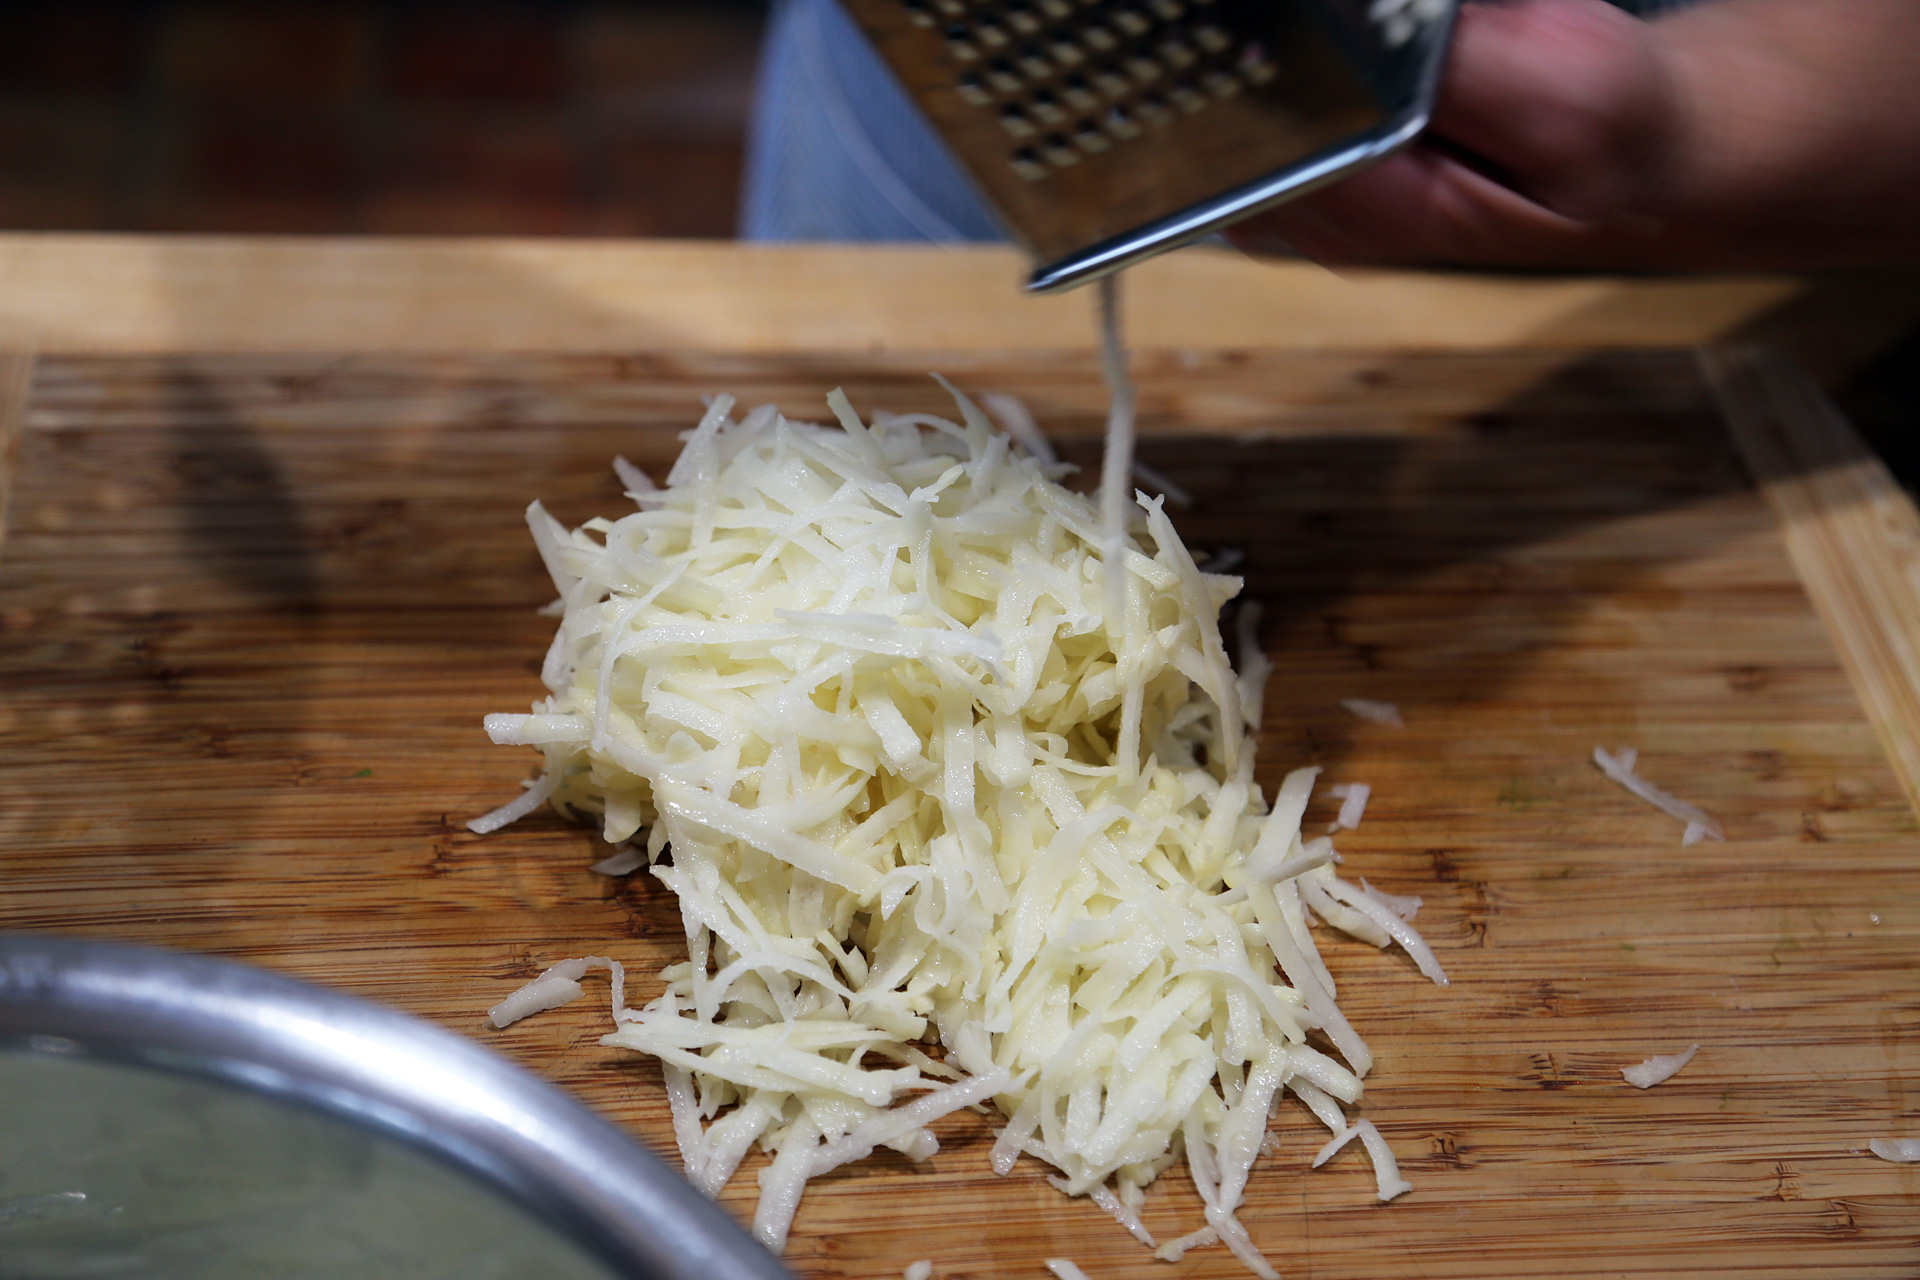 Shred the potatoes using the shredder insert in your food processor or by hand on the large holes of a box shredder-grater. 